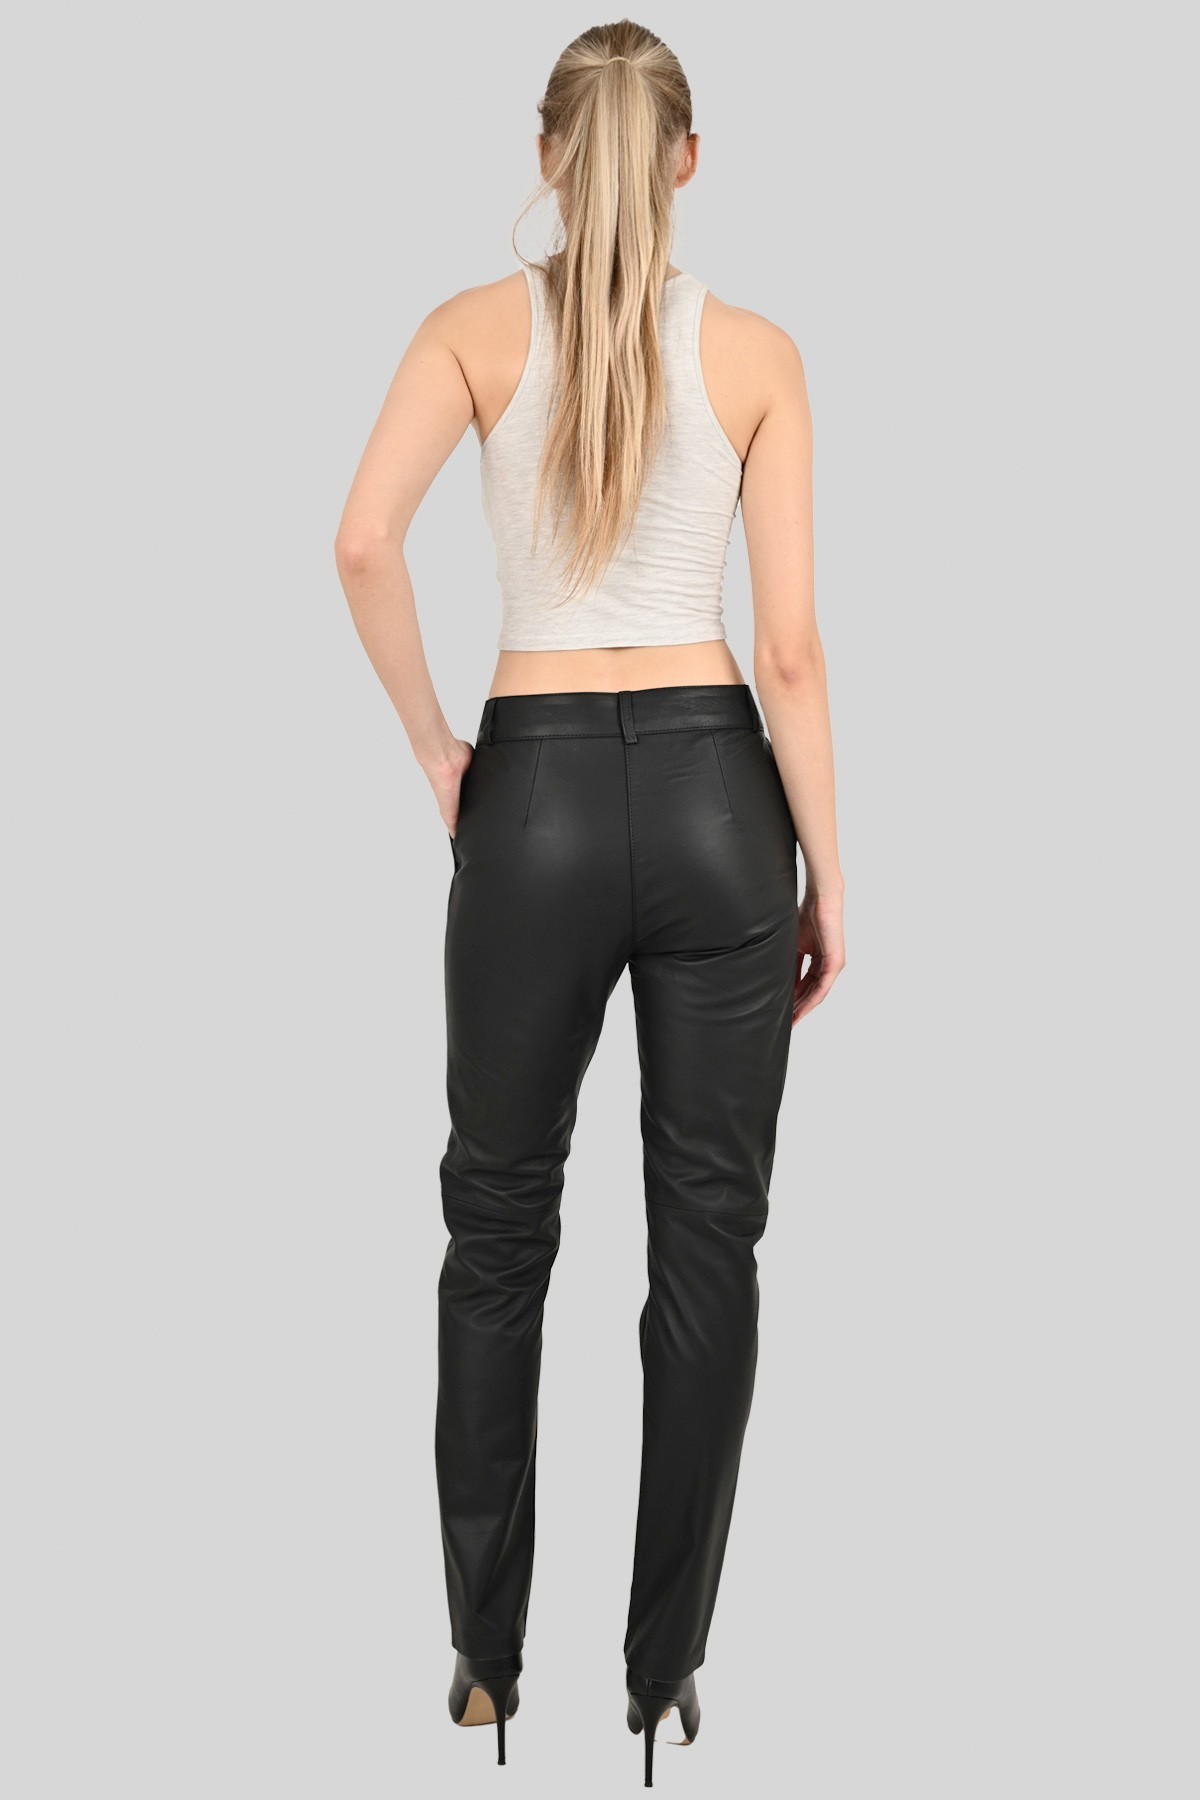 Women's Lee® Relax Fit Side-Elastic Jeans